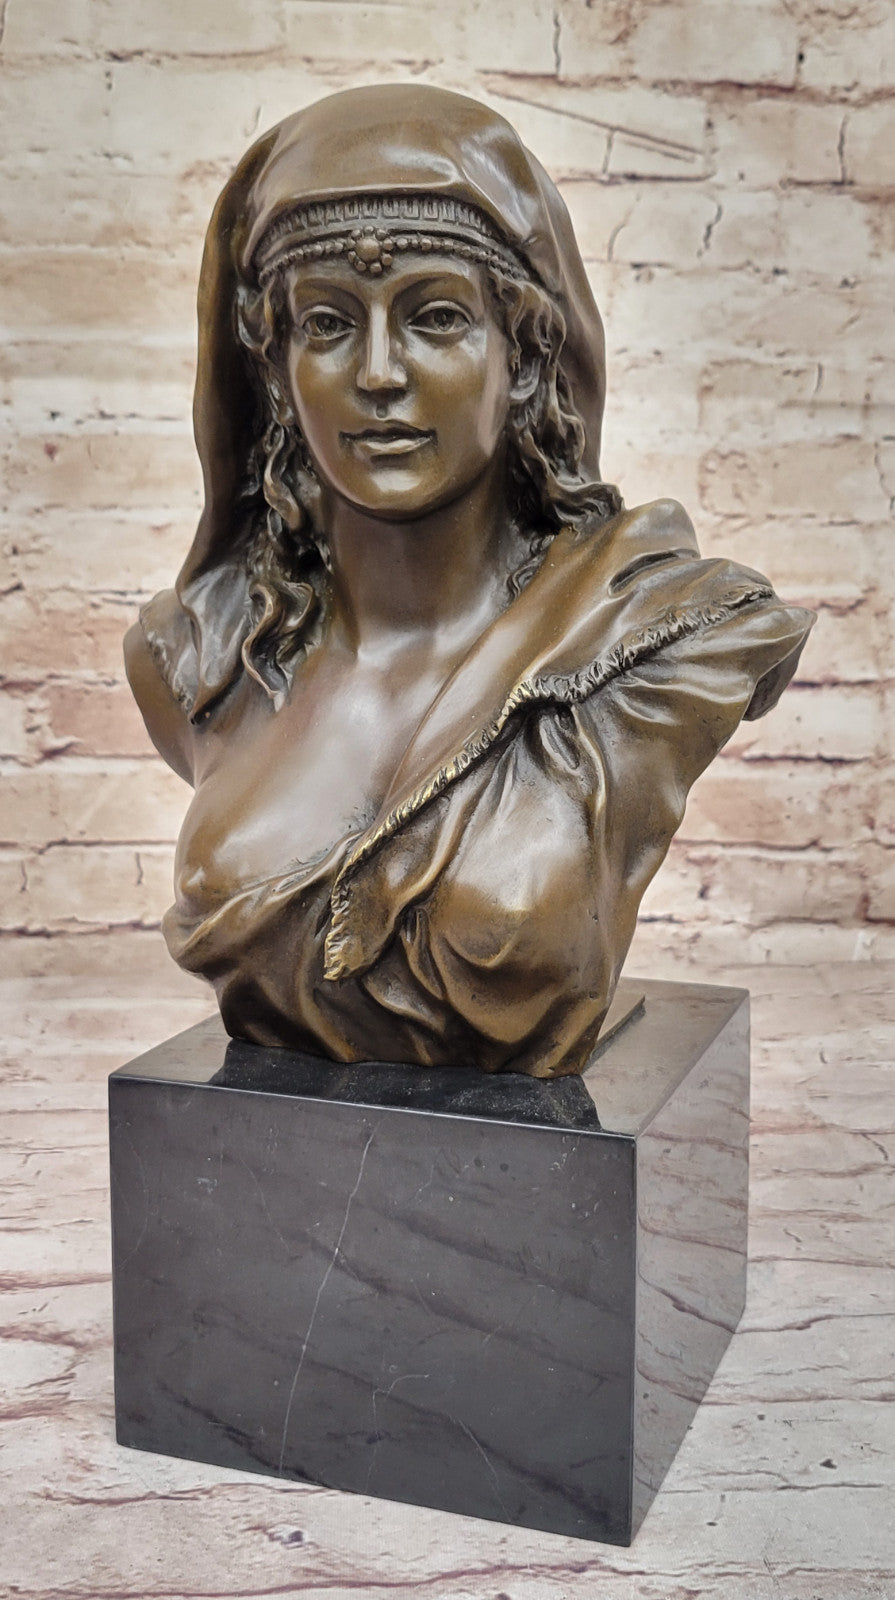 Detailed Museums Quality Classics: Woman Bronze Bust Collectible Sale